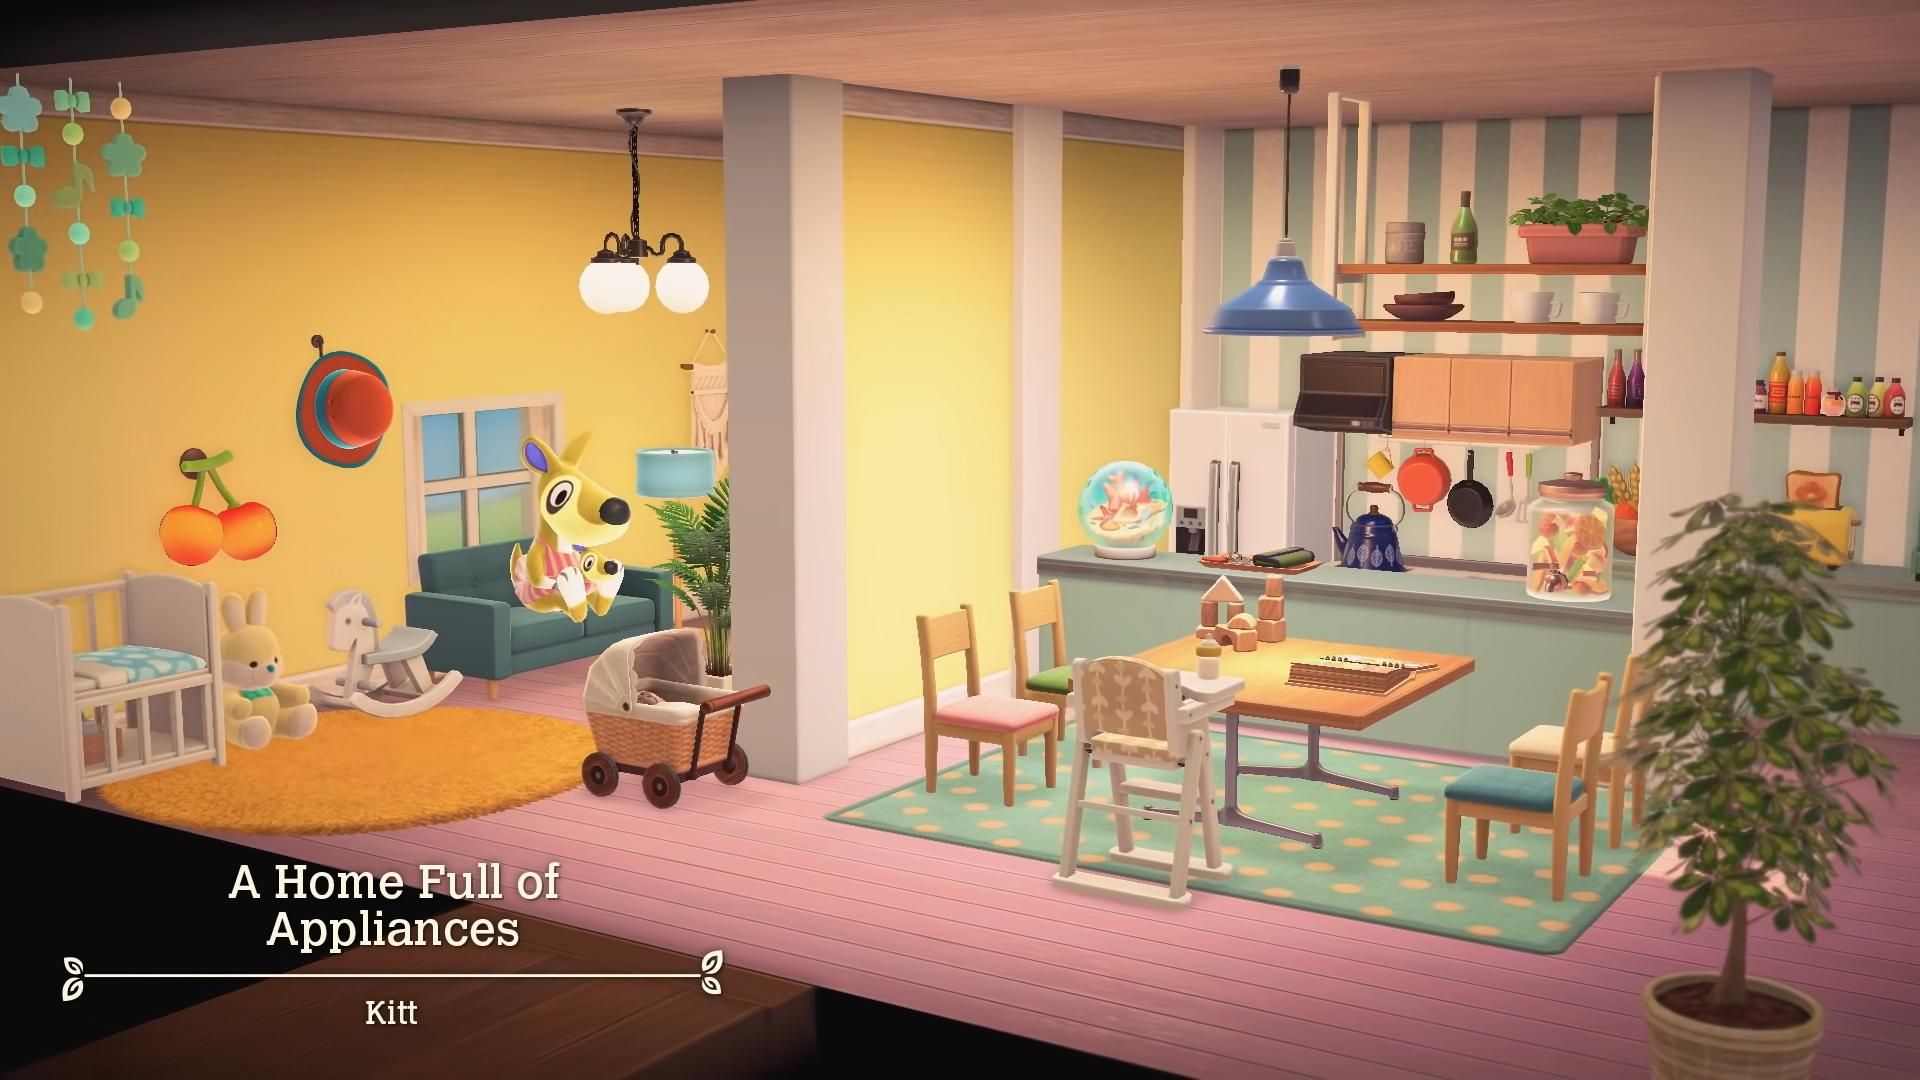 How do you get kitchen counters in Animal Crossing?